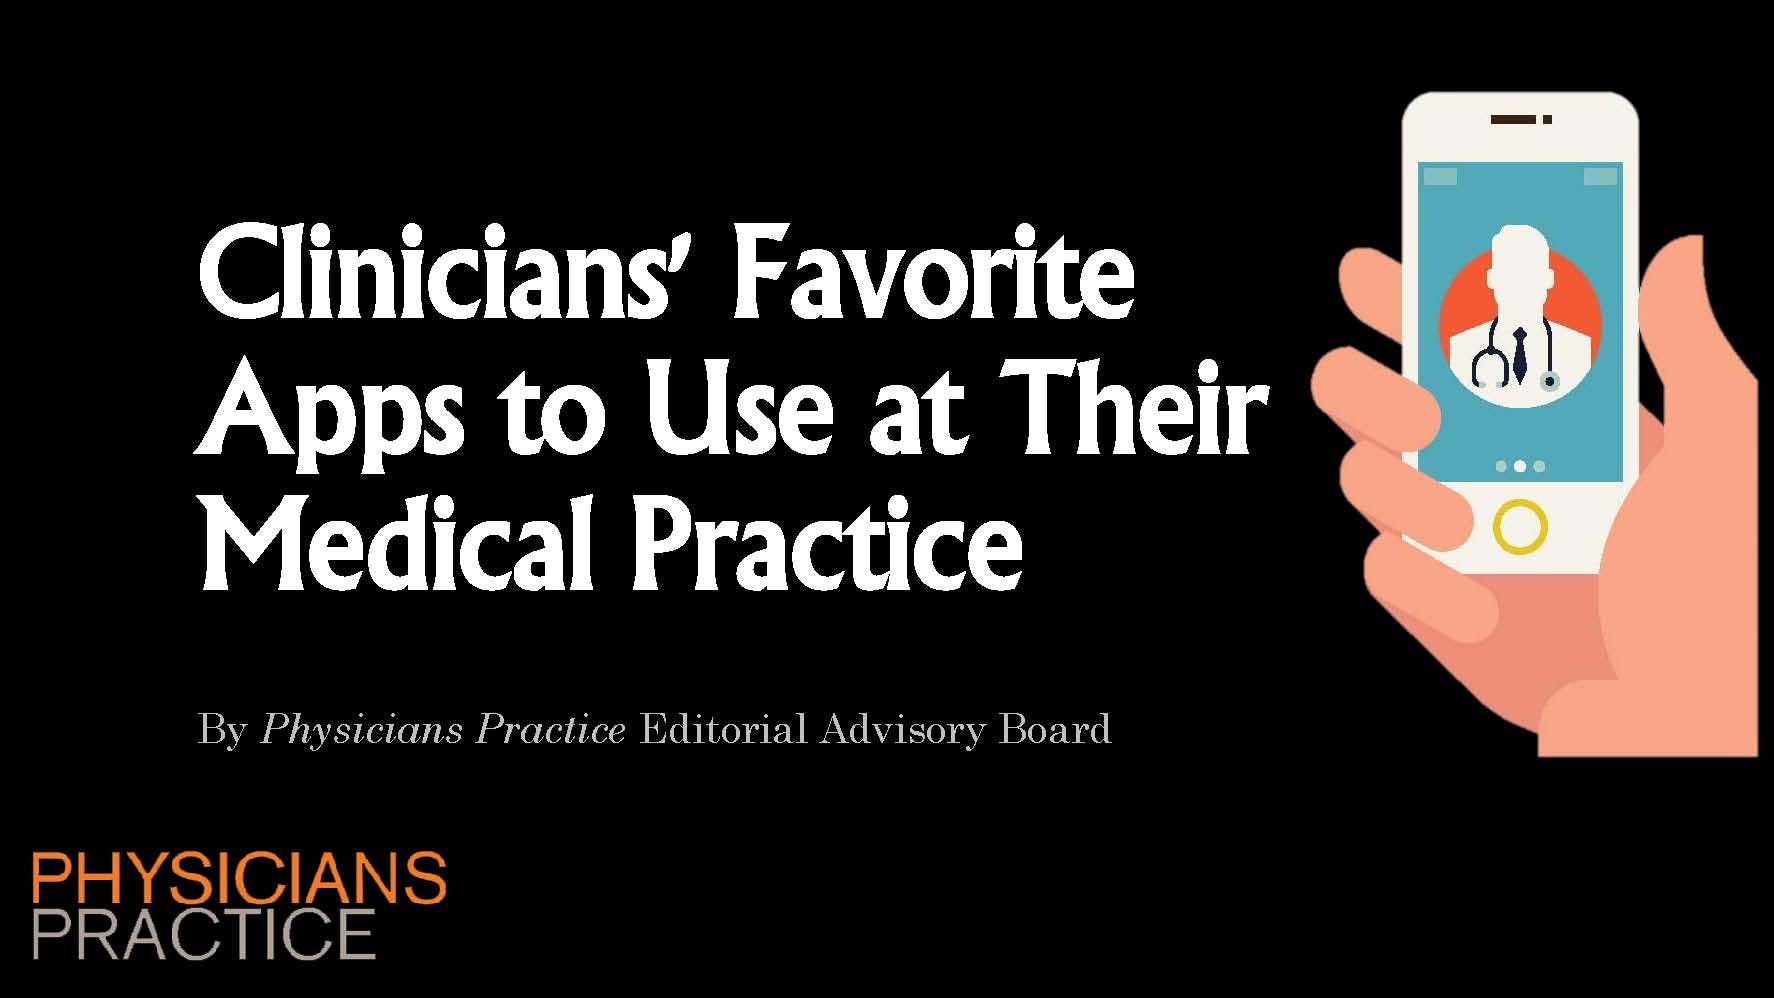 Clinicians' Favorite Apps to Use at Their Medical Practice